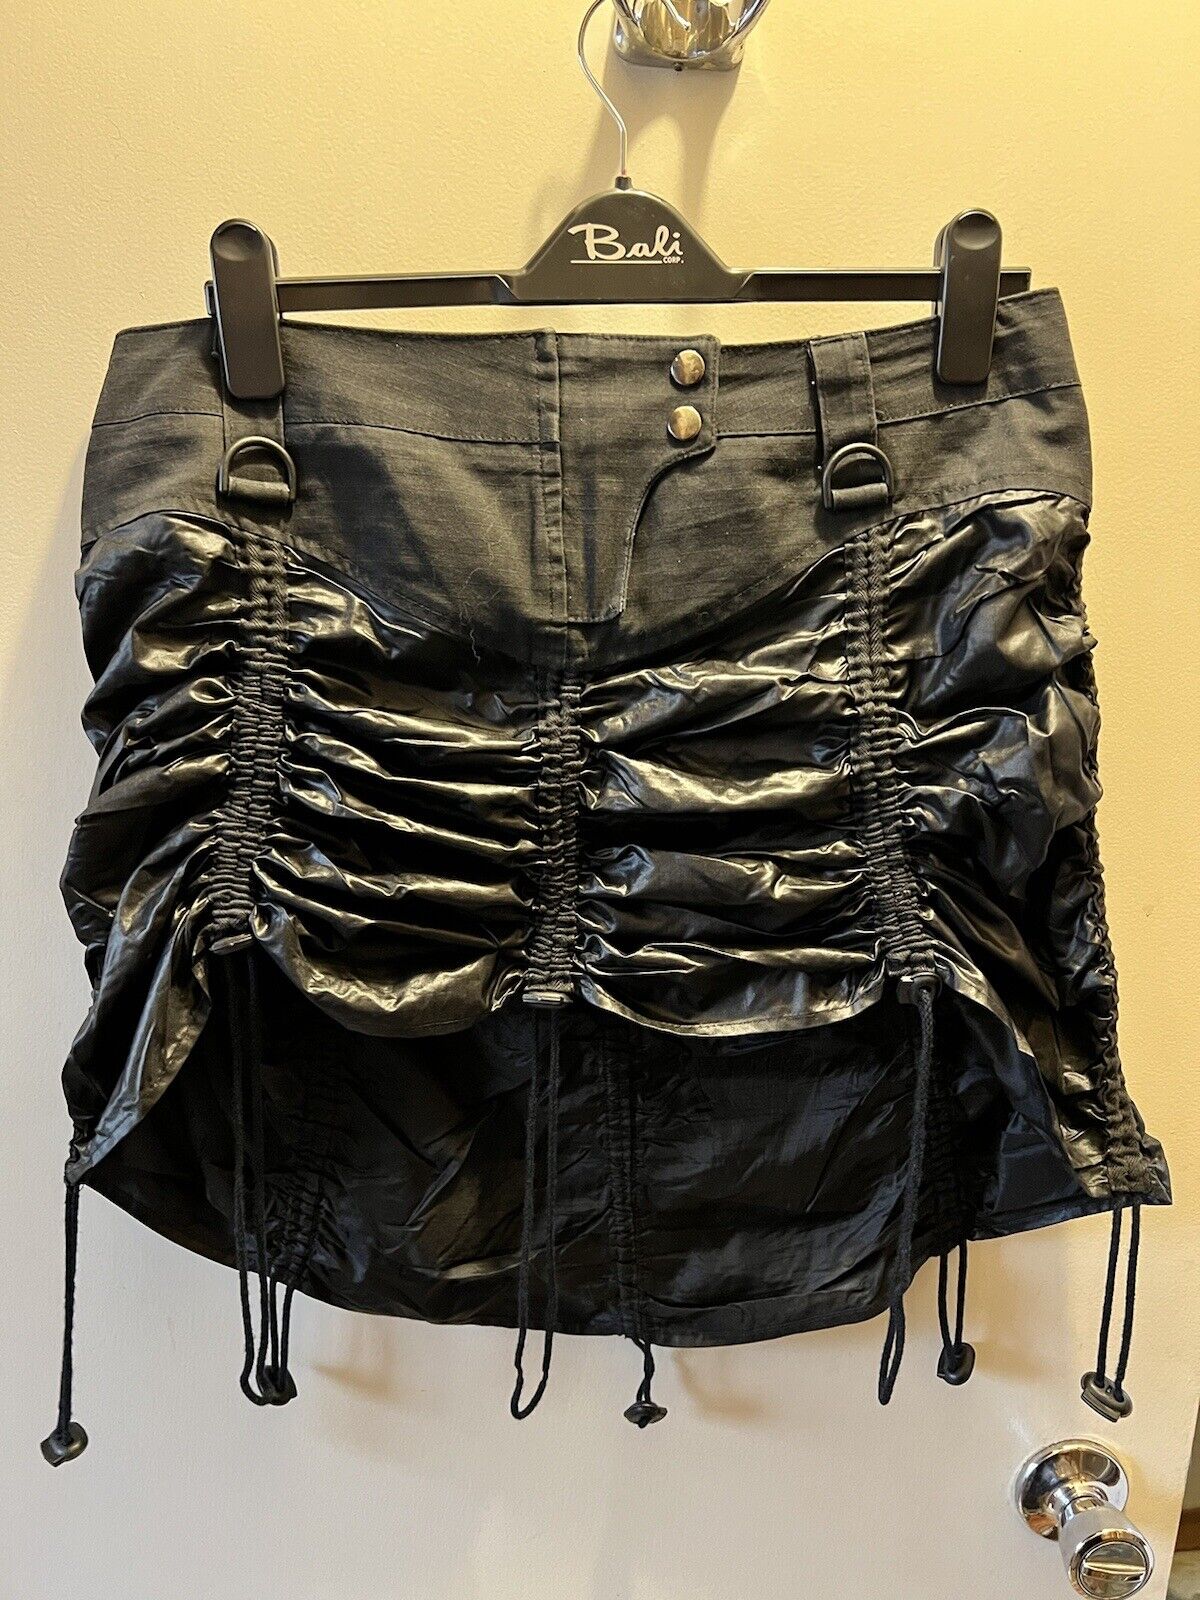 Lip Service Y2k Parachute Ruched mini skirt goth metal industrial Very rare L